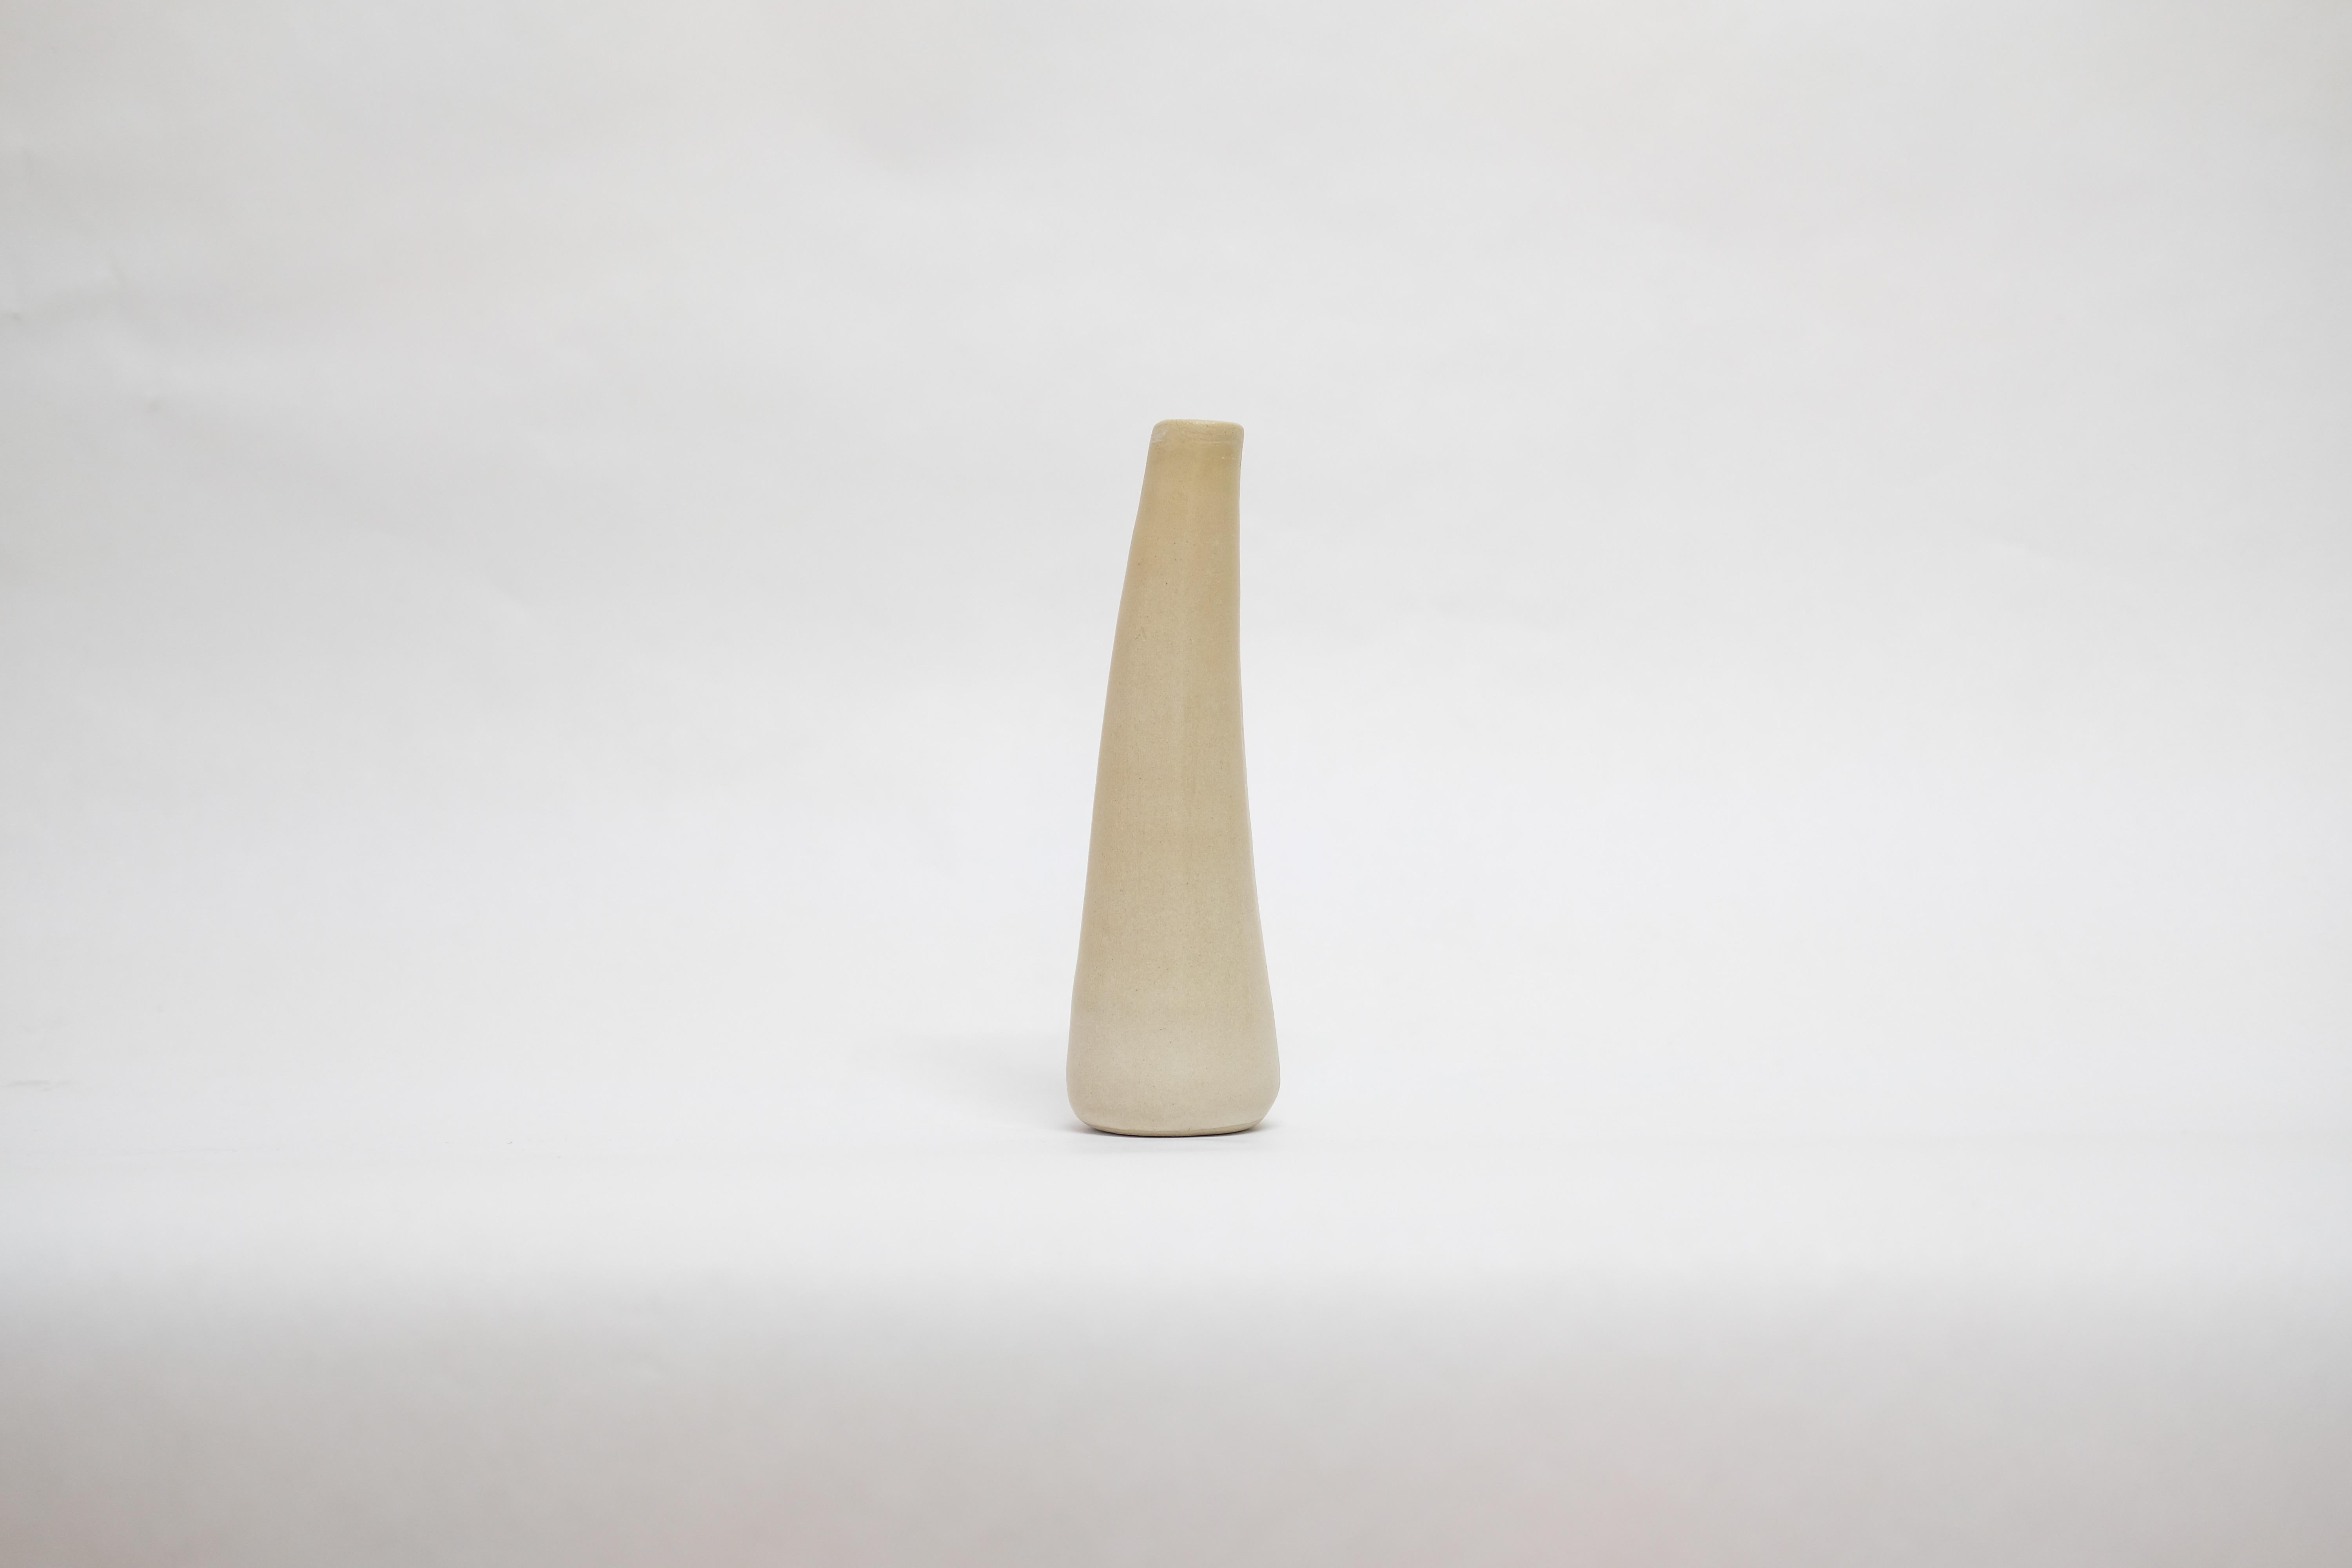 Solitario Stoneware vase by Camila Apaez
One of a kind
Materials: Stoneware
Dimensions: 7 x 7 x 19 cm
This year has been shaped by the topographies of our homes and the uncertainty of our time. We have found solace in the humbleness of silence